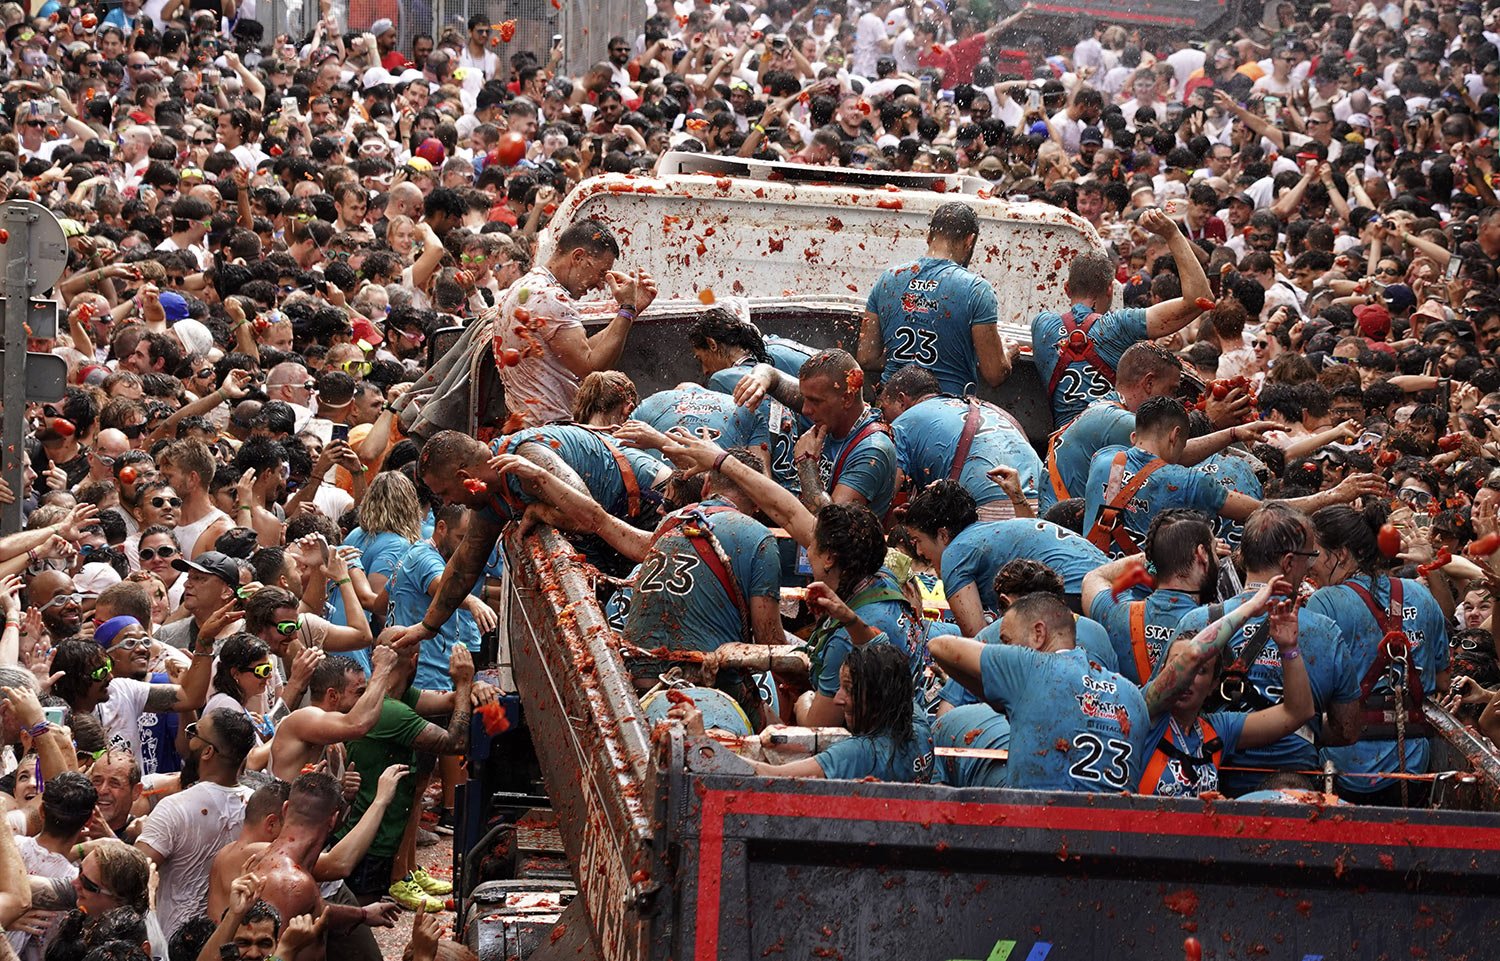  Workers on a truck toss out overripe tomatoes to participants in Bunol, Spain, Wednesday, Aug. 30, 2023. (AP Photo/Alberto Saiz) 